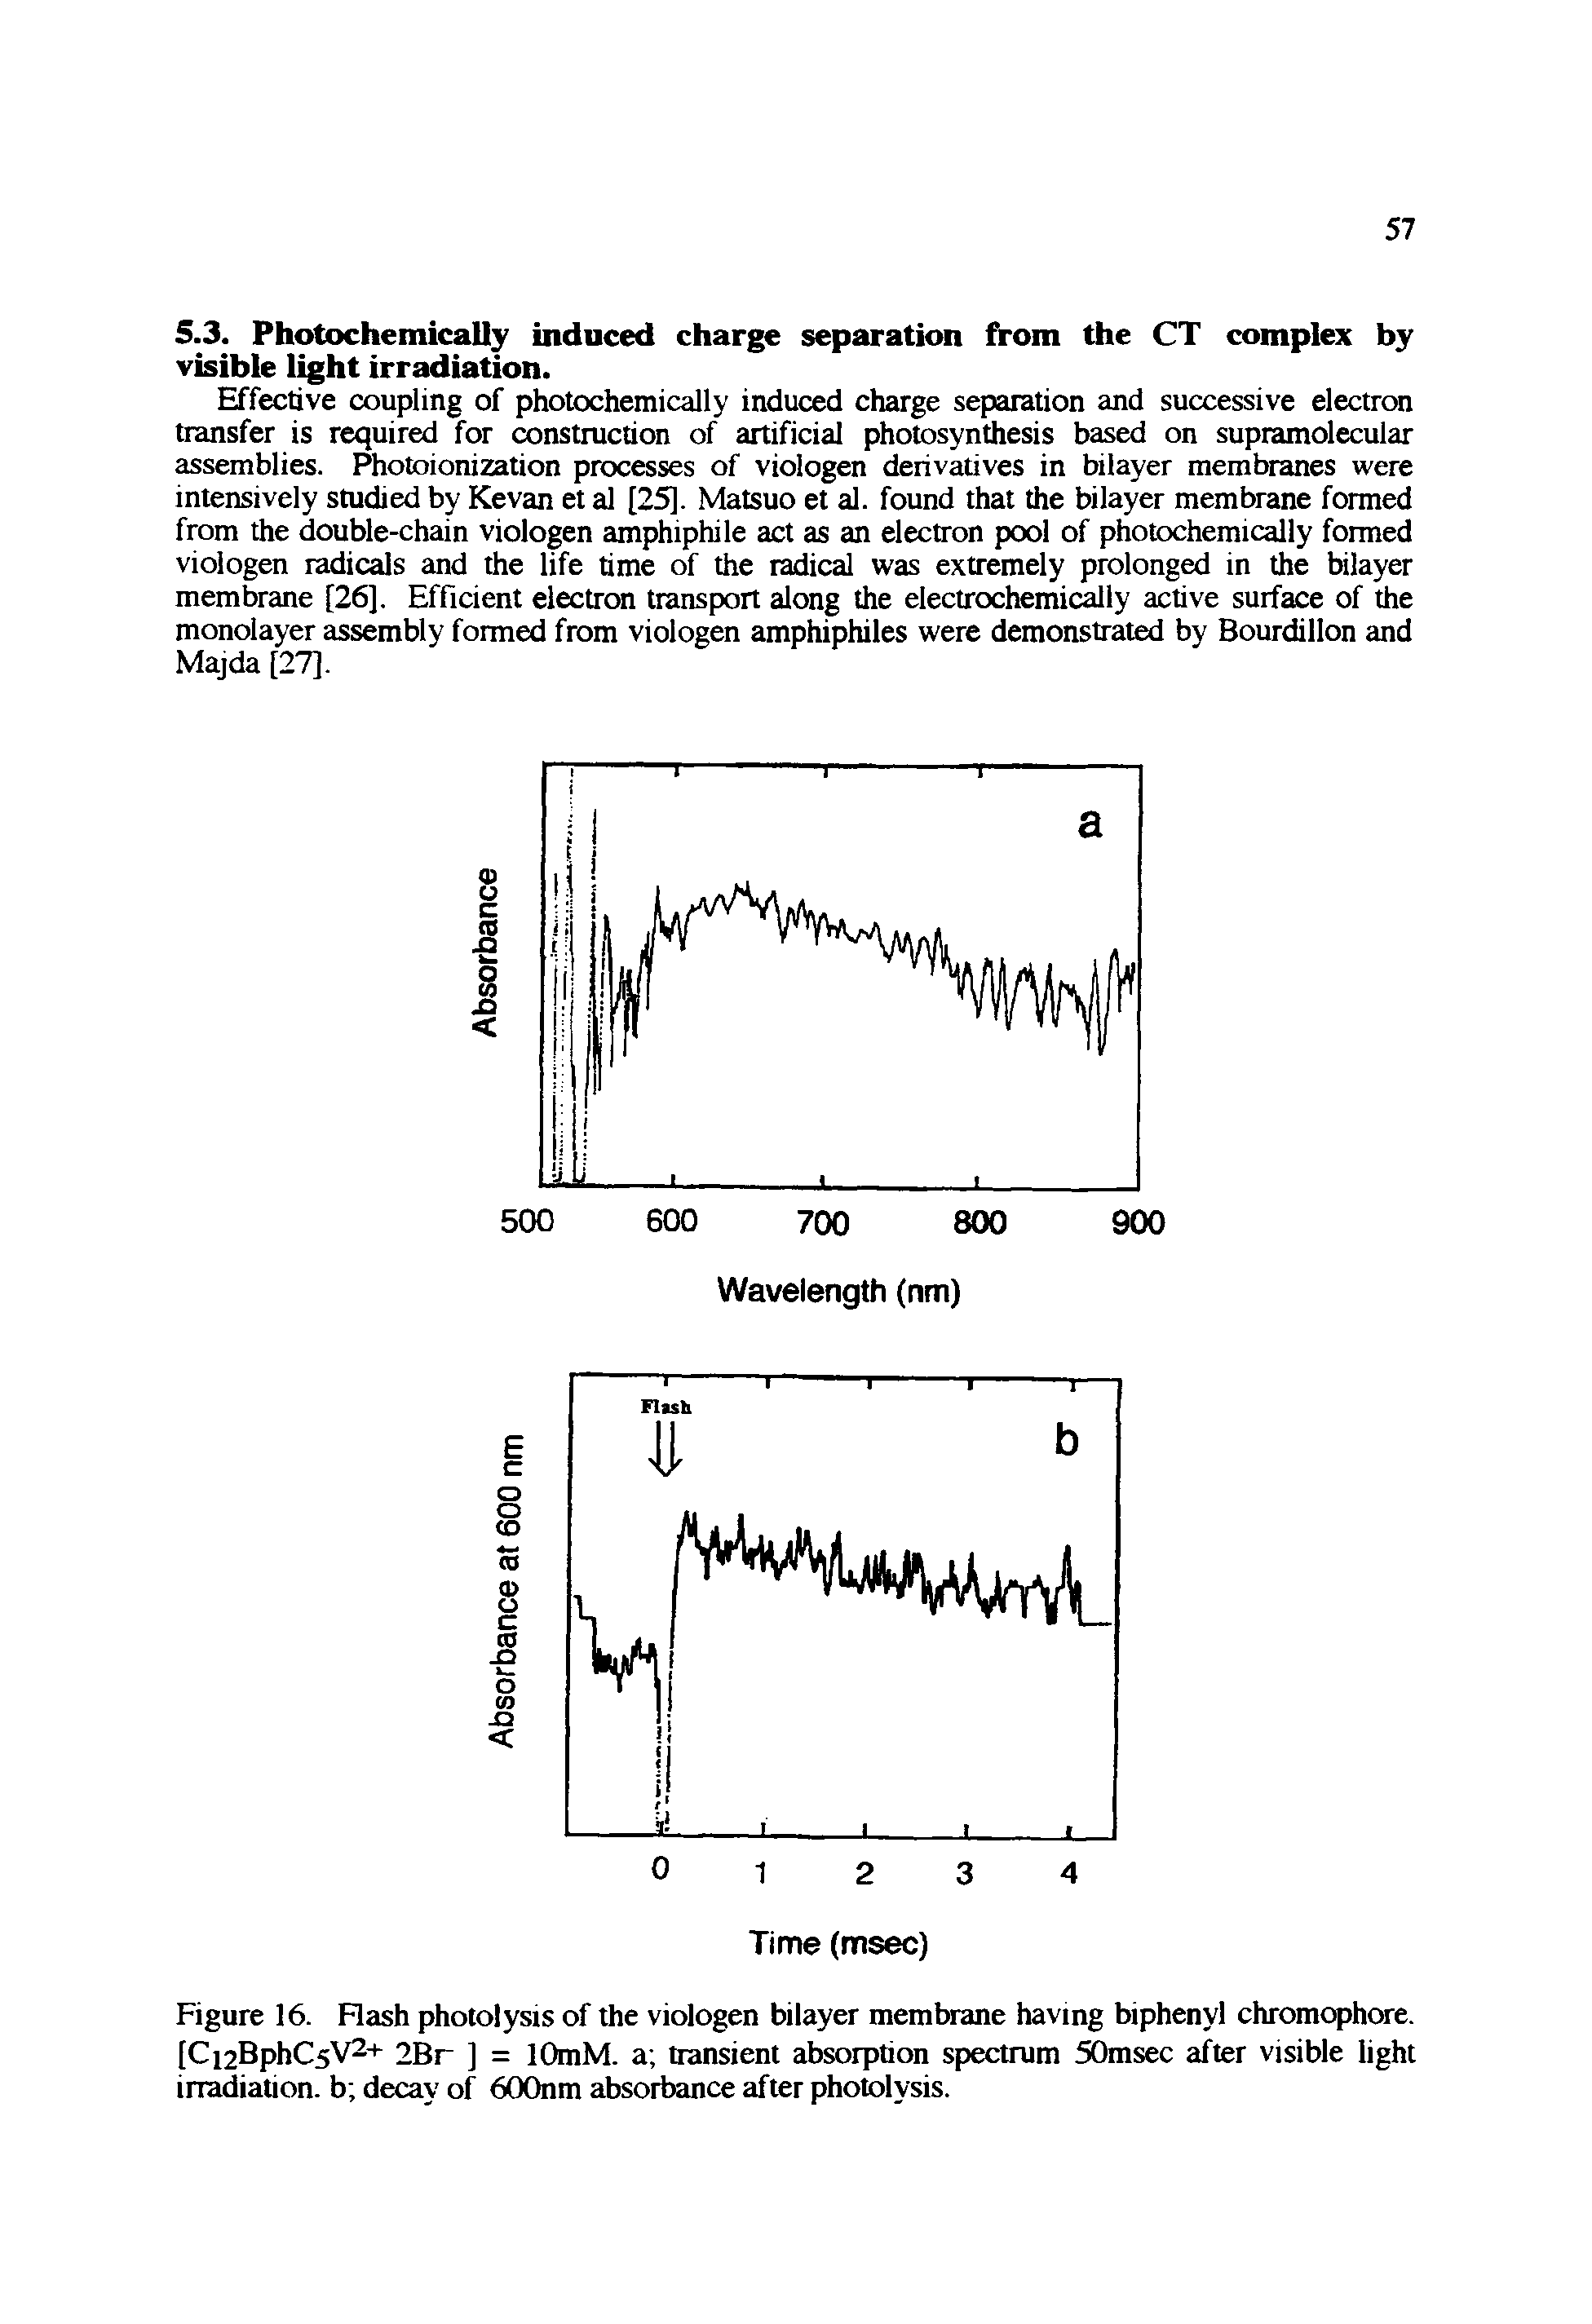 Figure 16. Flash photolysis of the viologen bilayer membrane having biphenyl chromophore. [Ci2BphC5V2+ 2Br ] = lOmM. a transient absorption spectrum 50msec after visible light irradiation, b decay of 600nm absorbance after photolysis.